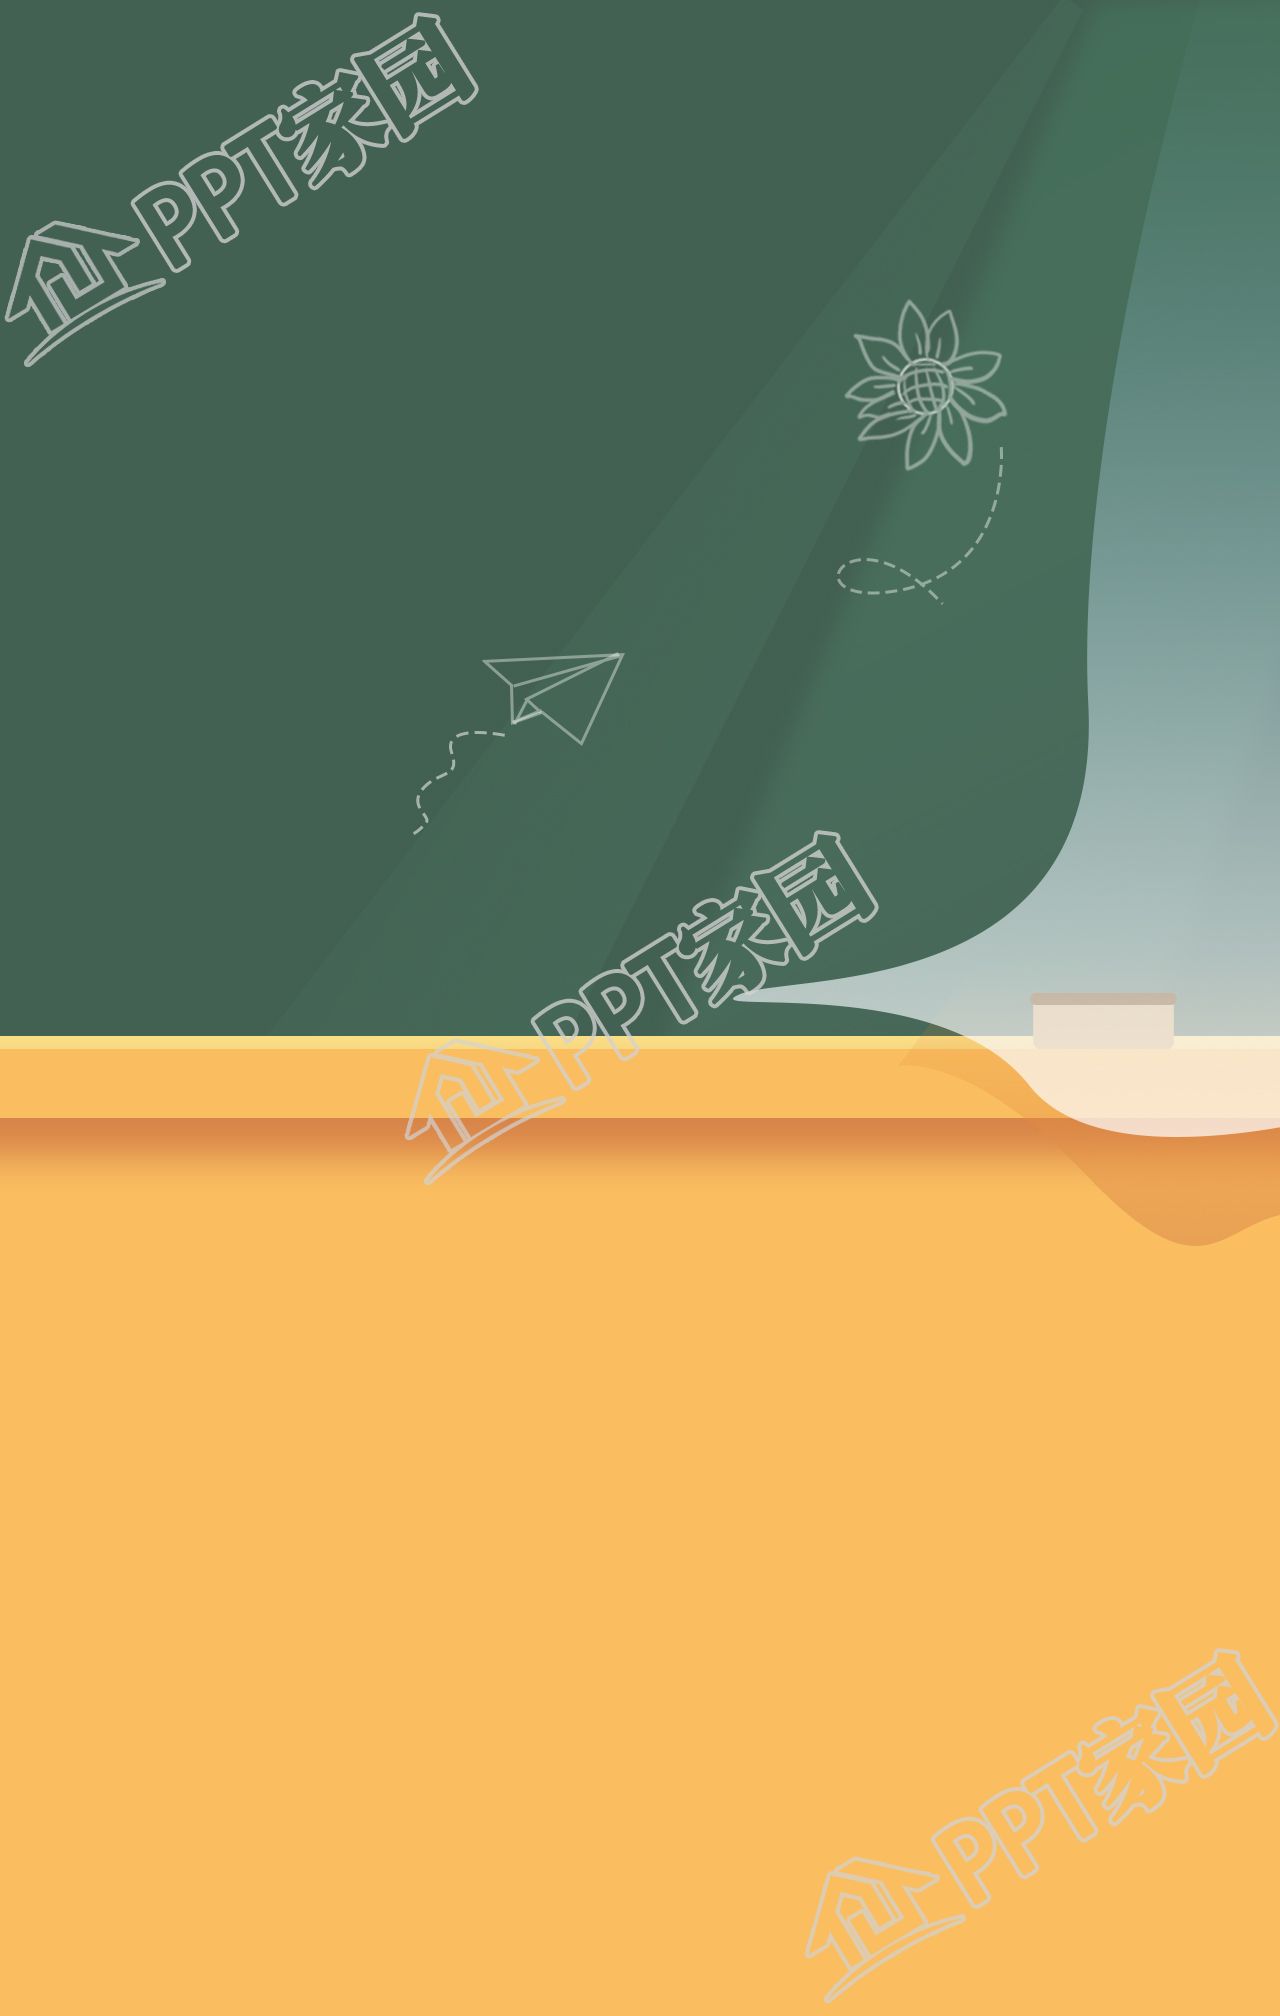 Education podium blackboard classroom background picture material download recommended